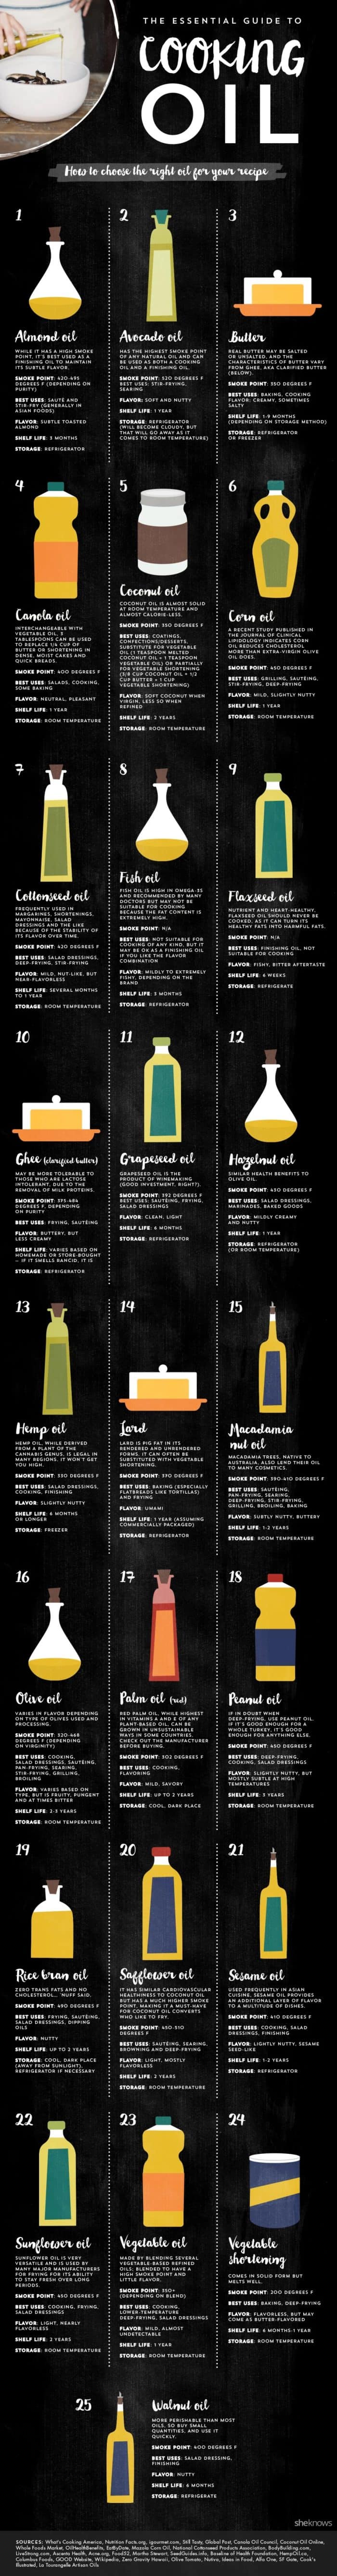 Cooking oils infographic